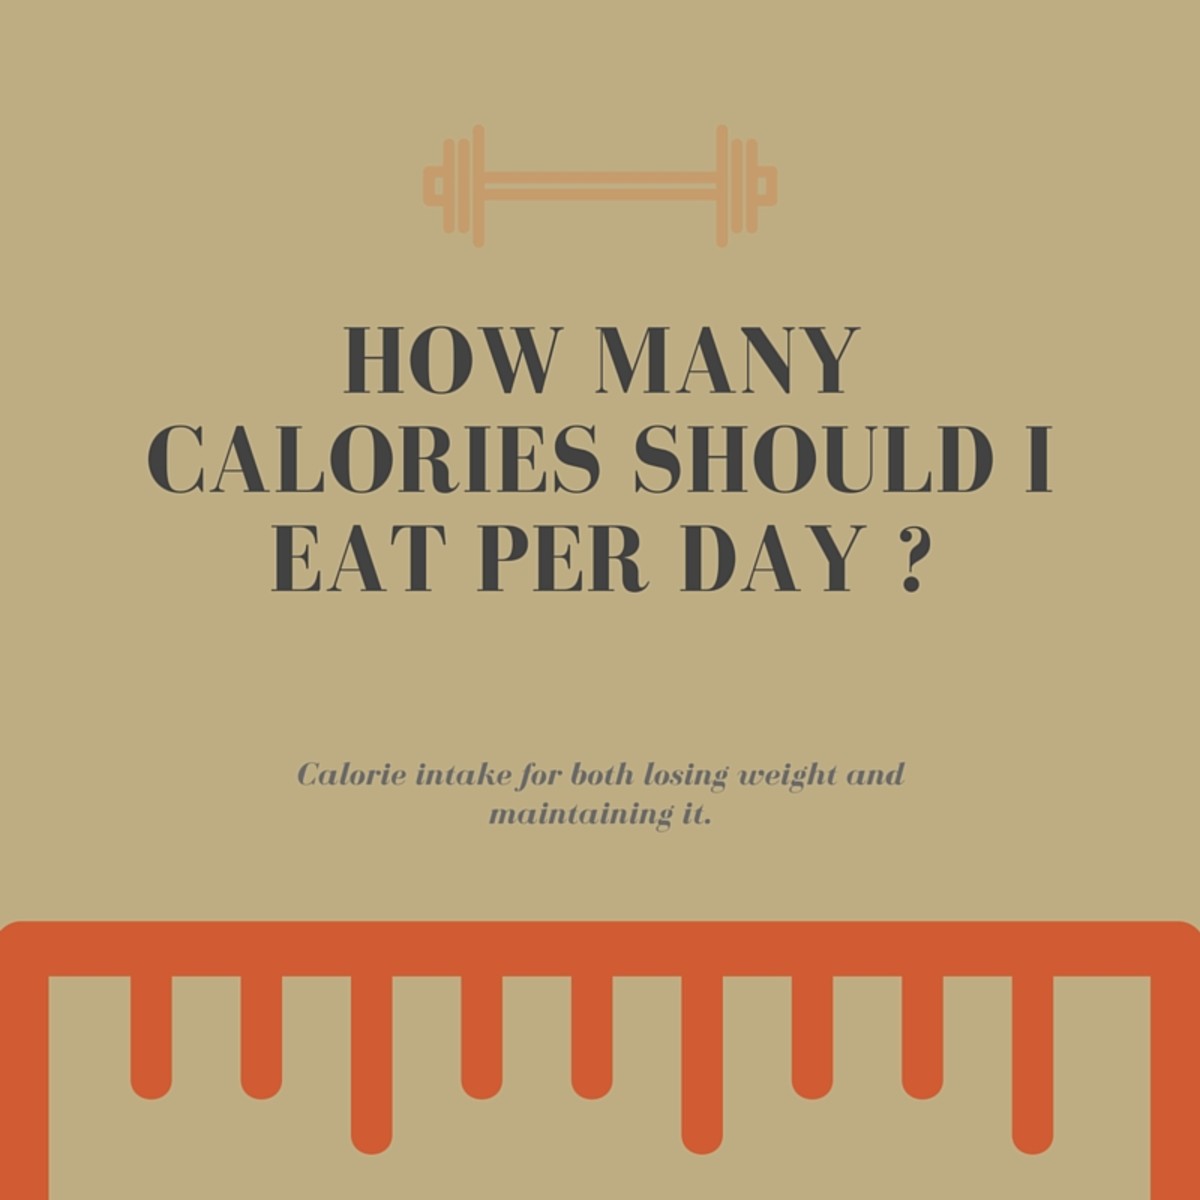 how many calories to lose weight per day